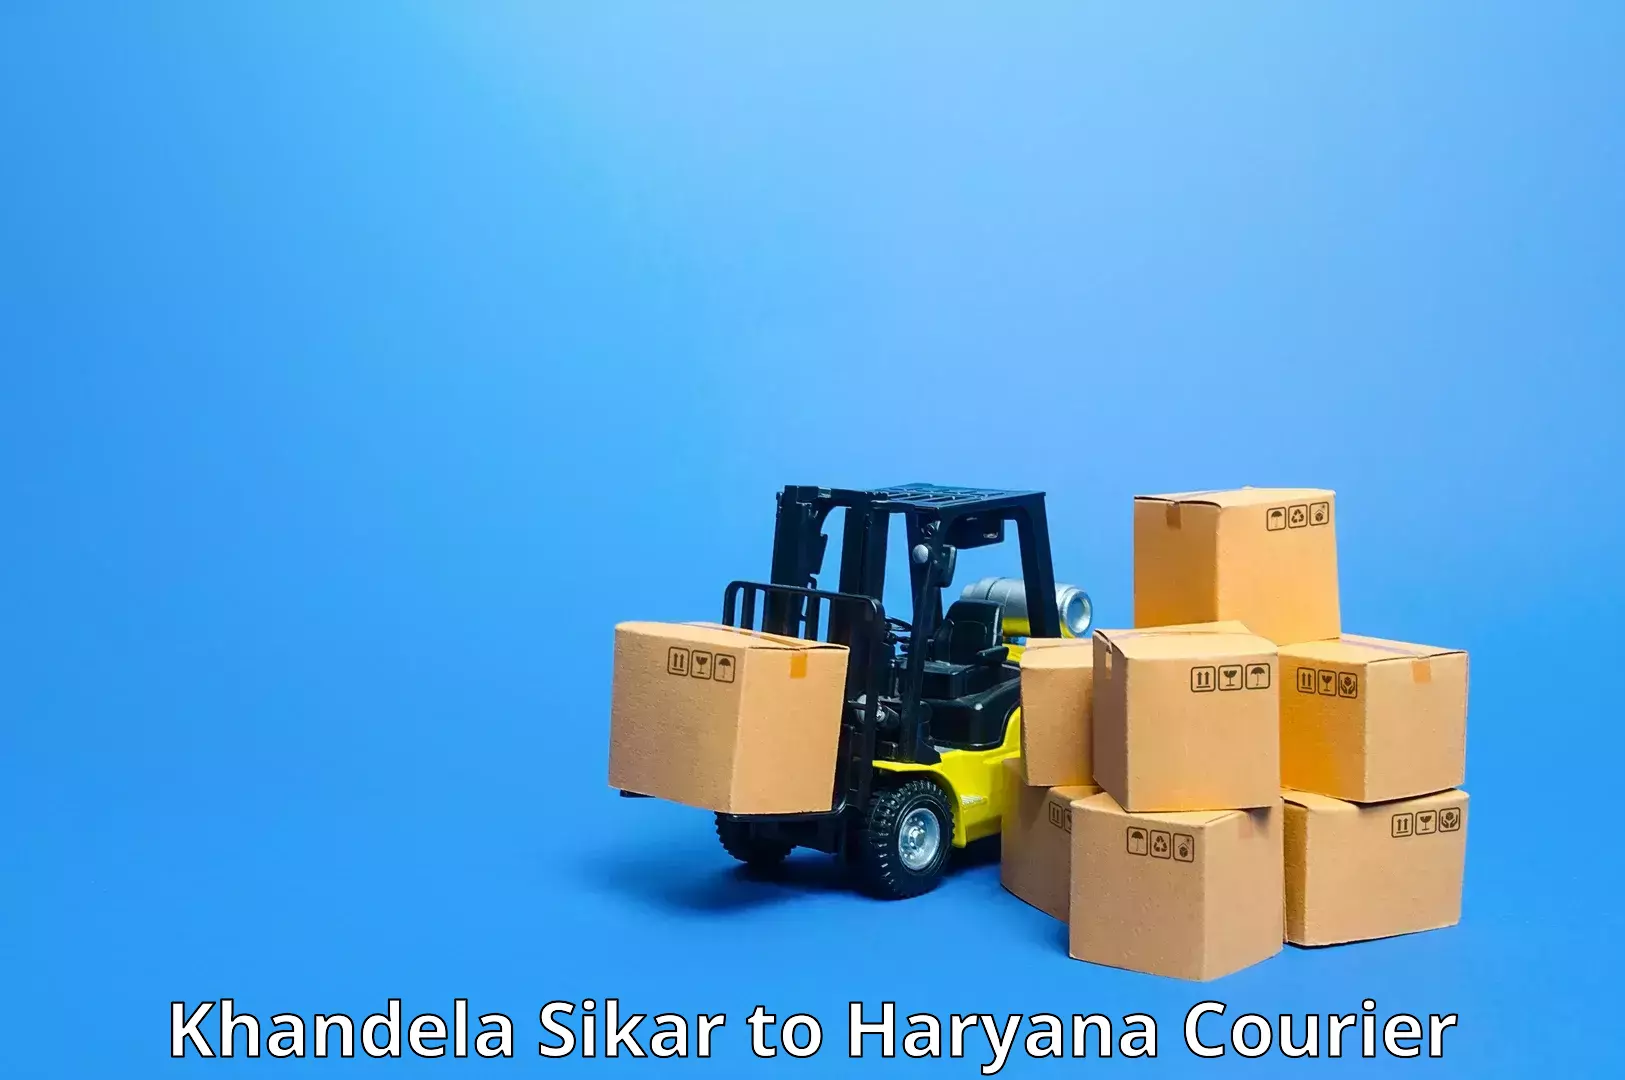 Secure freight services Khandela Sikar to Sirsa